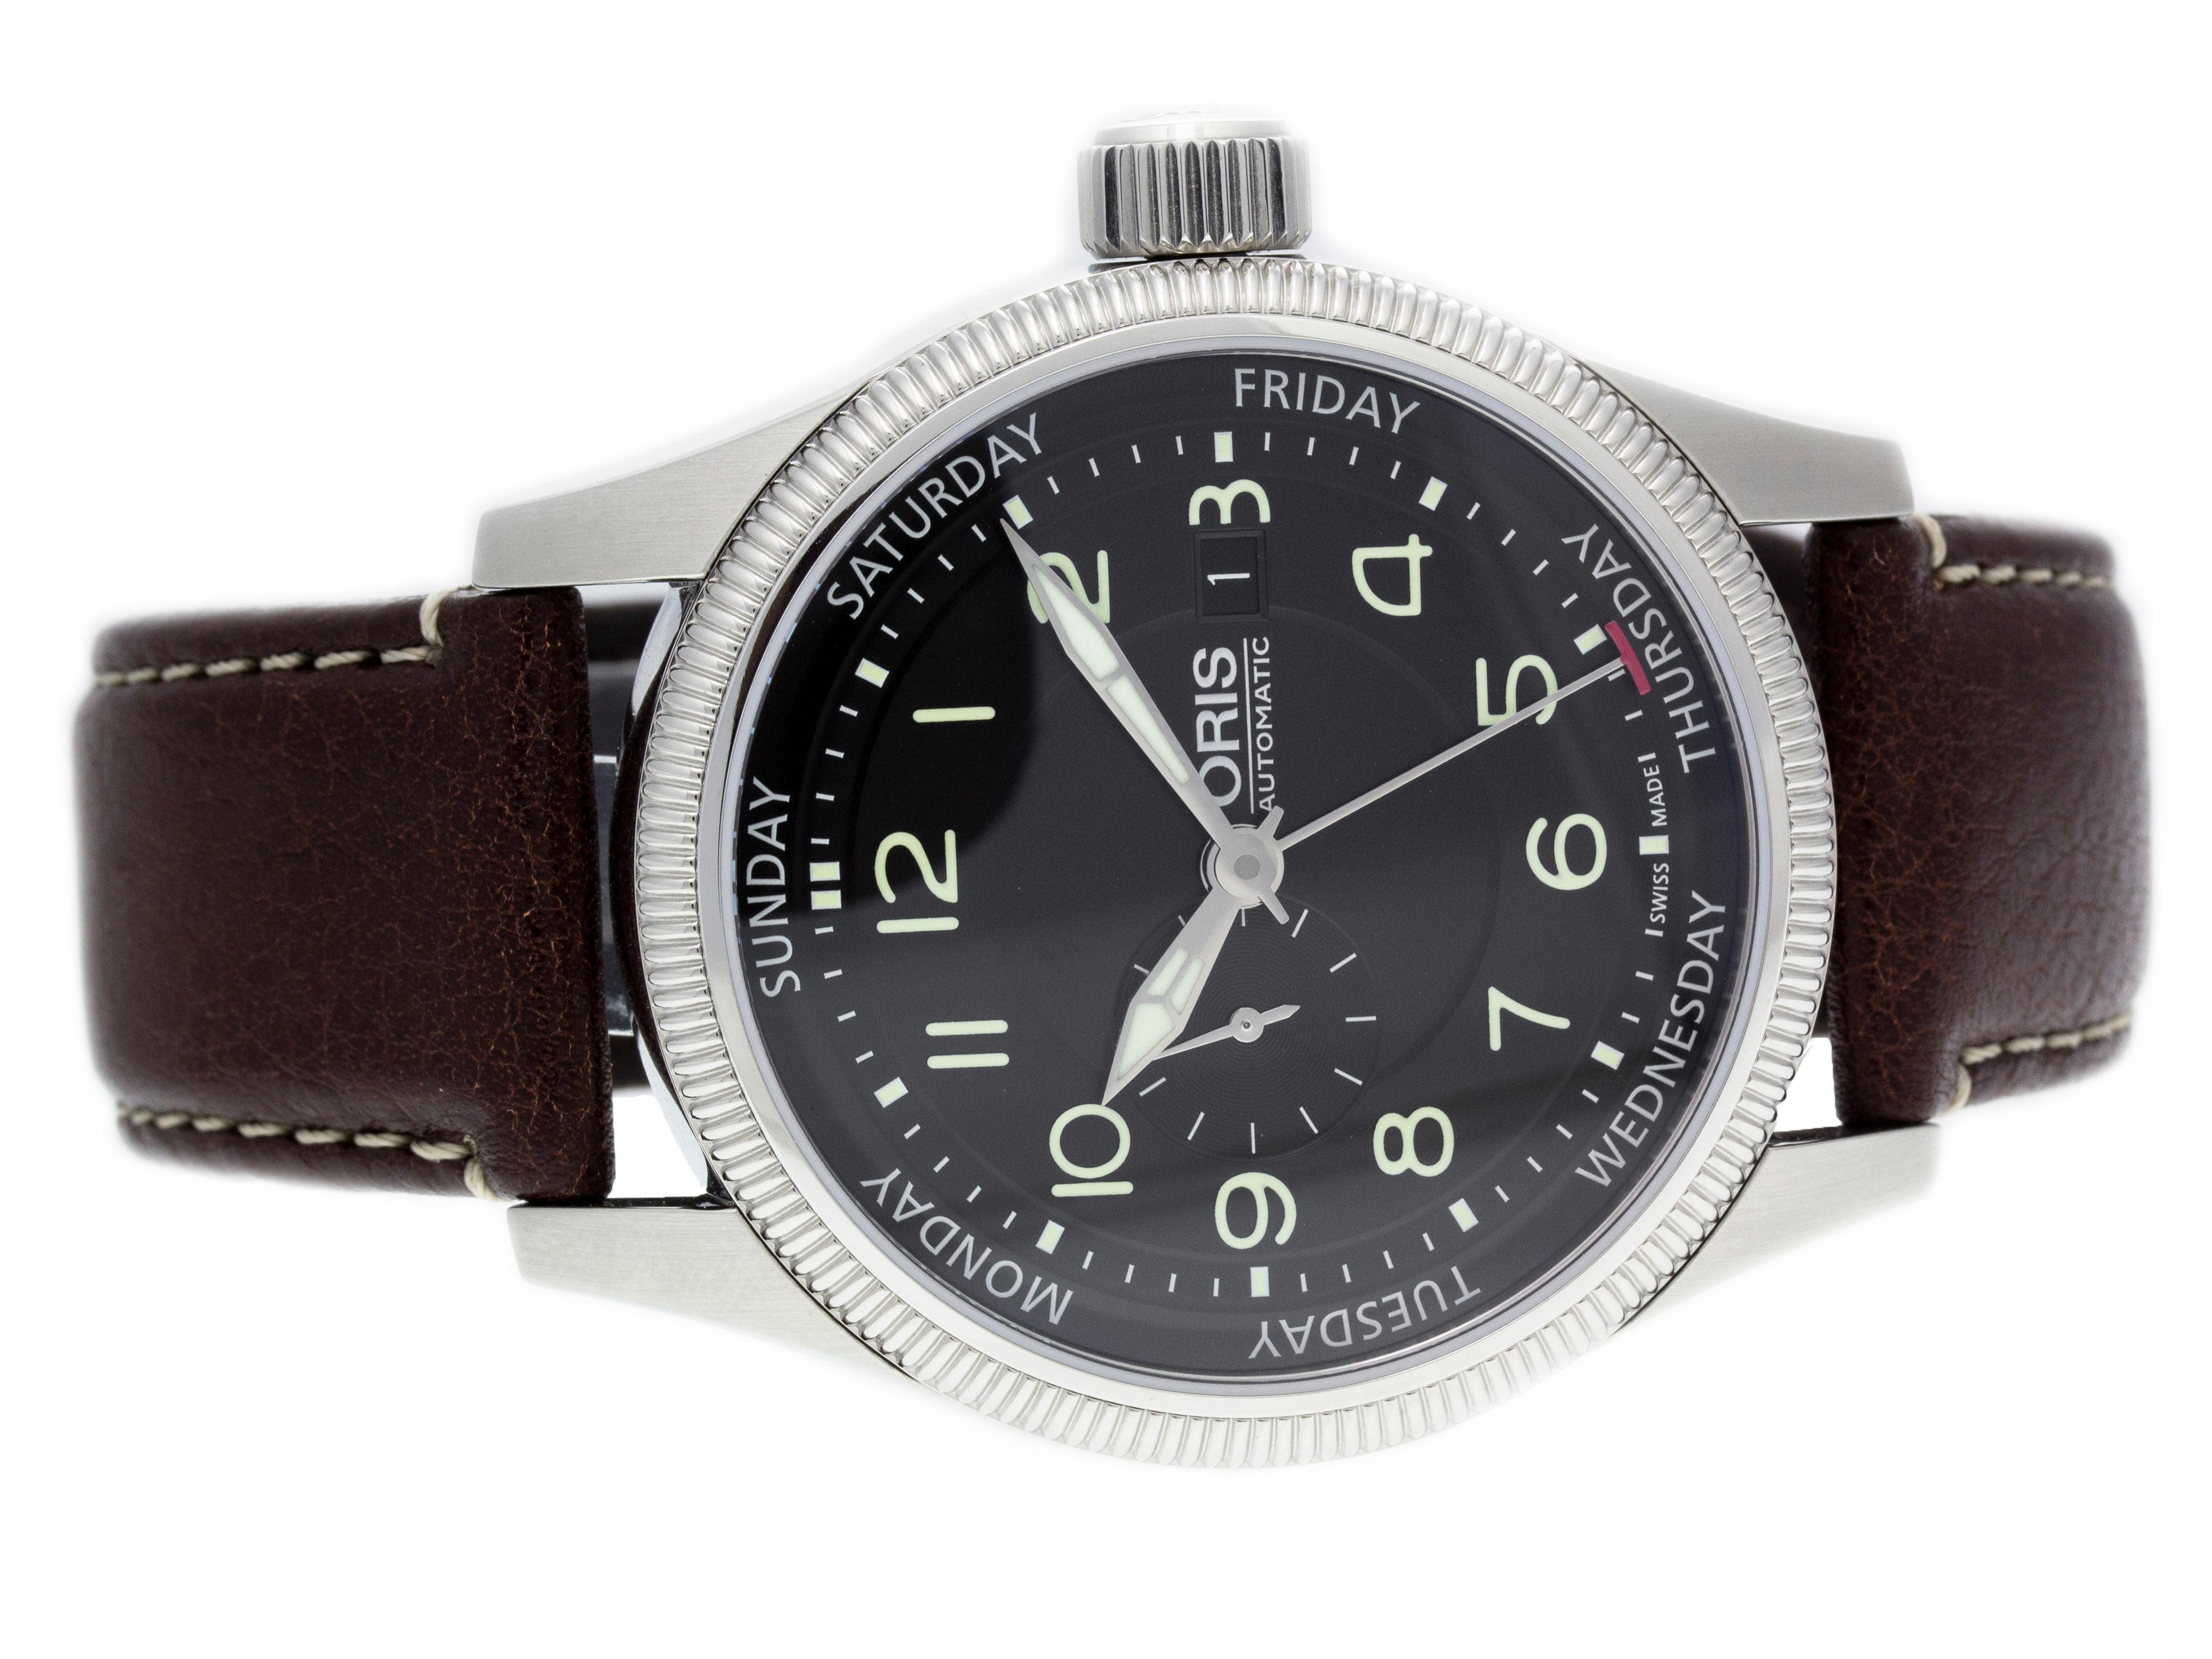 Stainless steel Oris Big Crown ProPilot automatic watch with a 44mm case, black dial, and brown leather strap with deployment clasp. Features include hours, minutes, seconds, day, and date. Comes with a Deluxe Gift Box and 2 Year Store